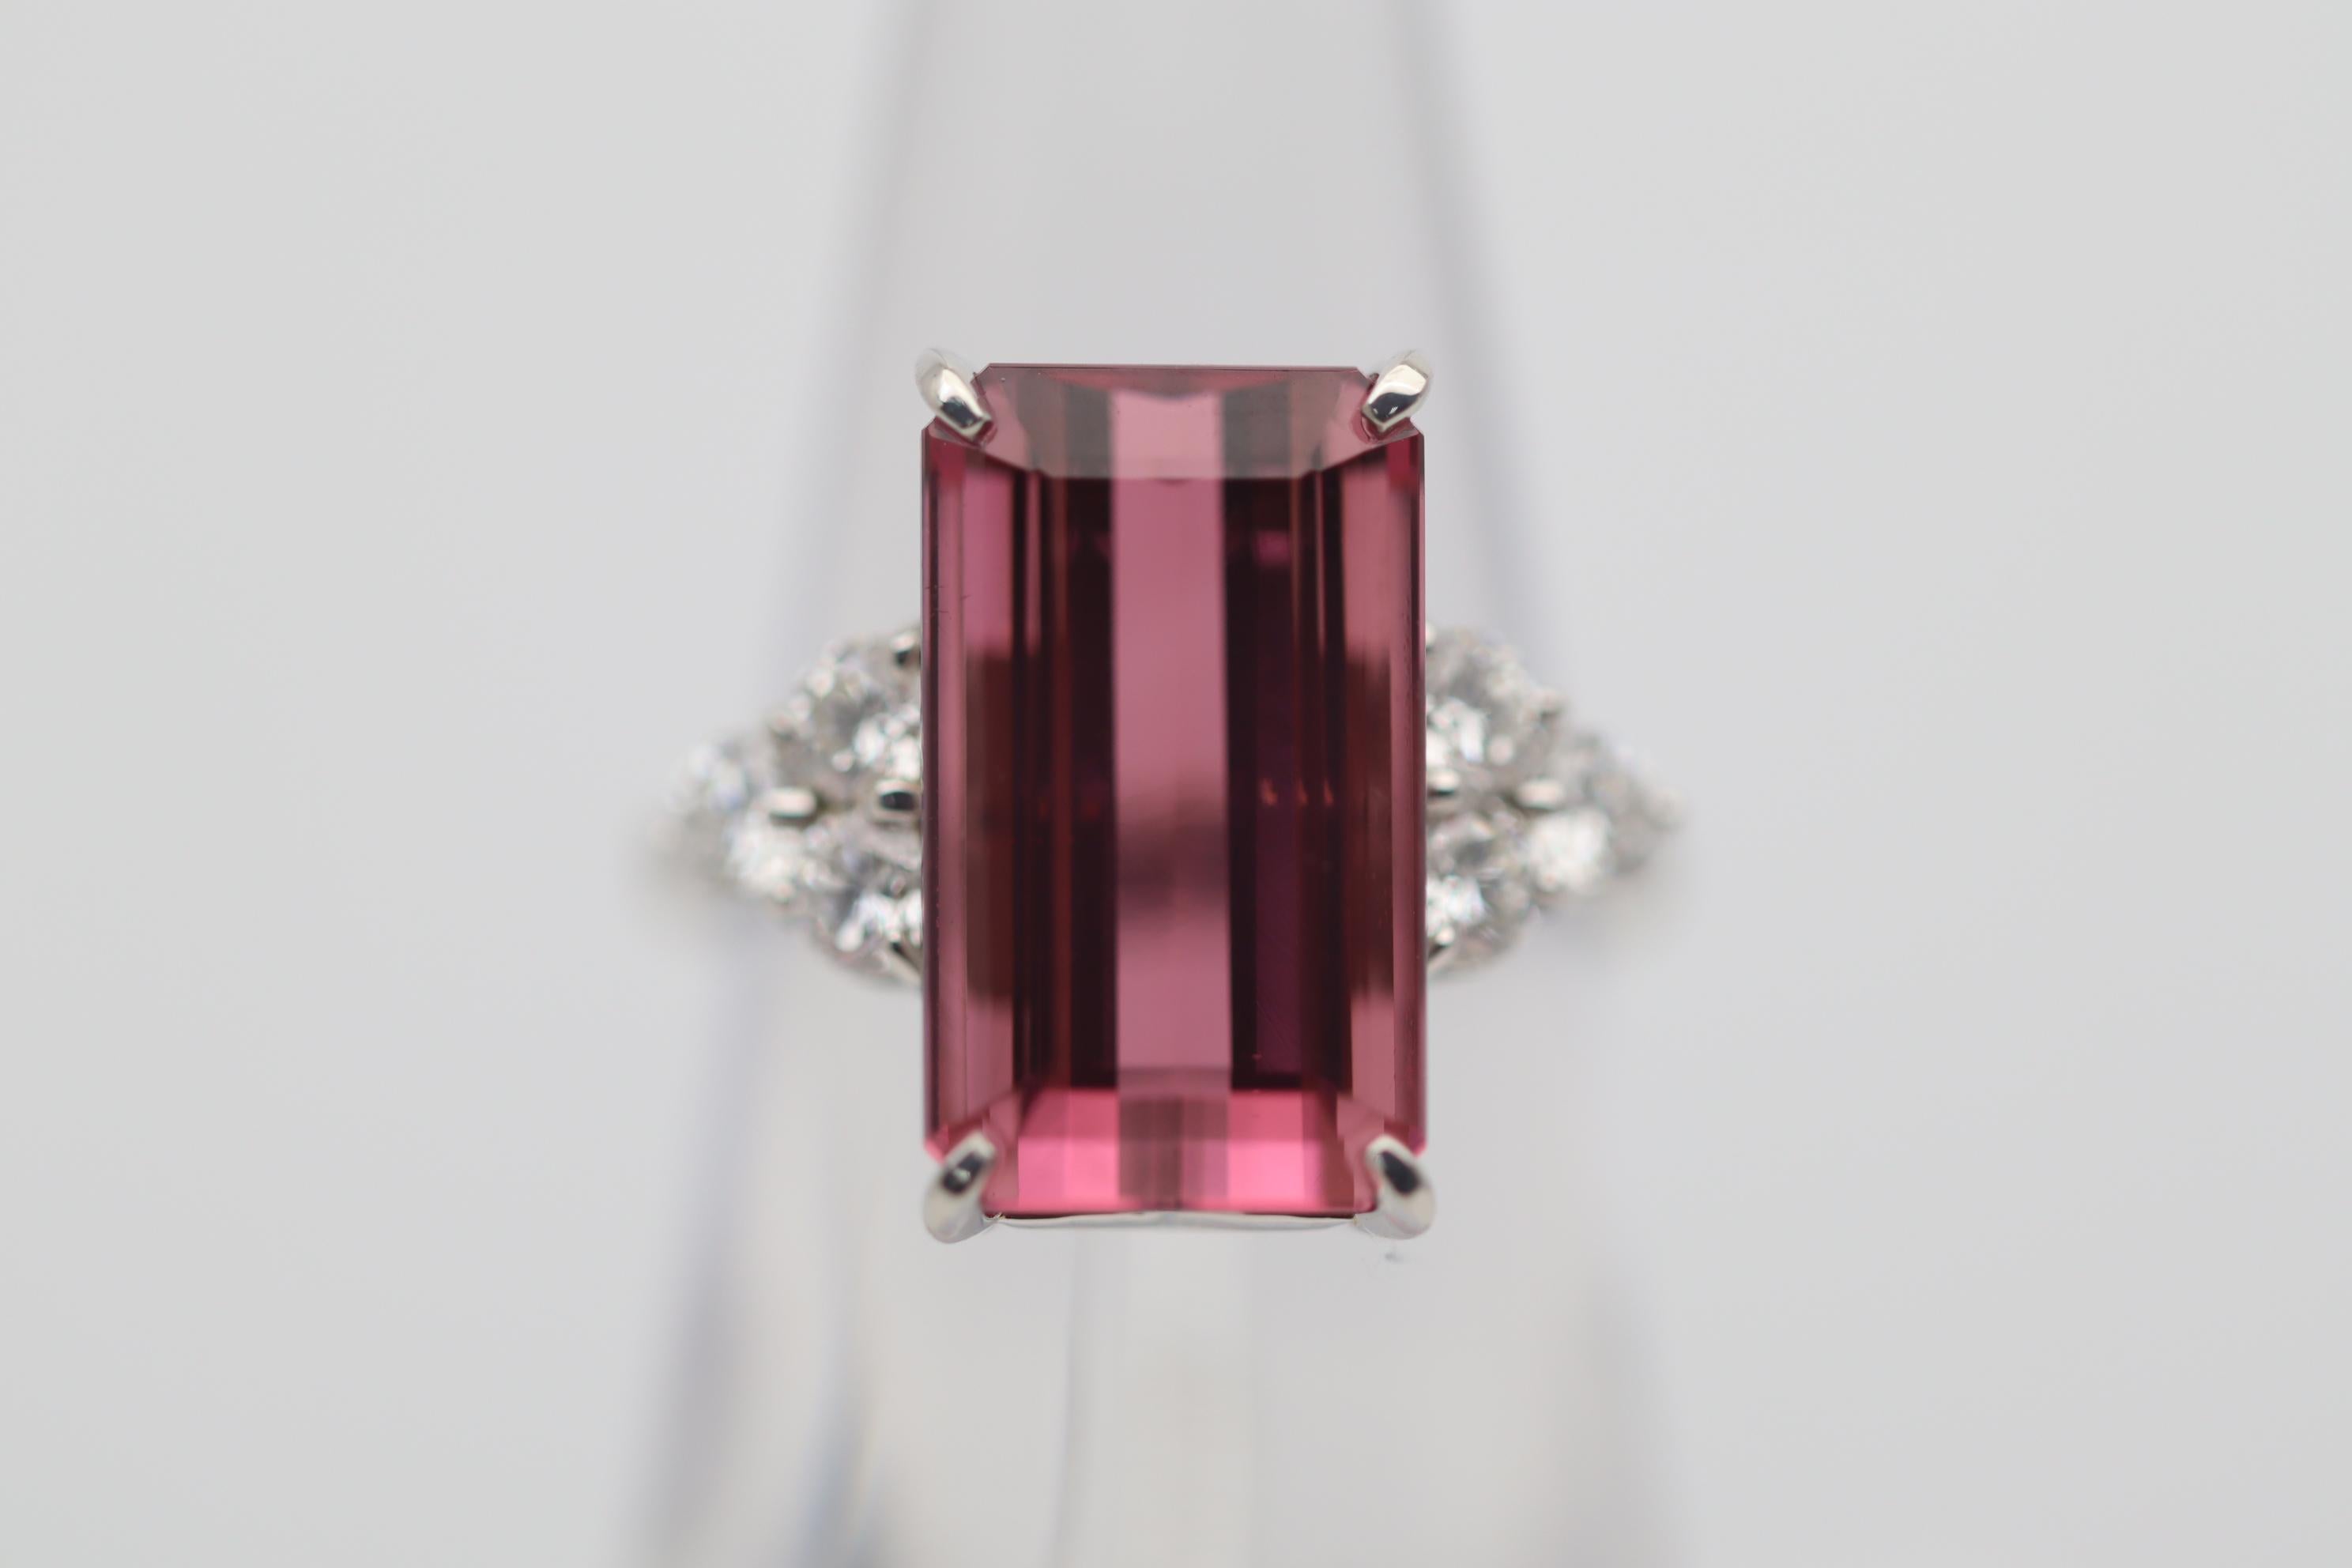 A fine and luscious tourmaline takes center stage. It weighs an impressive 11.05 carats and has bright juicy pink color that is so pleasing to the eye. Adding to that, it has a long rectangular shape and is loup clean meaning no inclusions can be